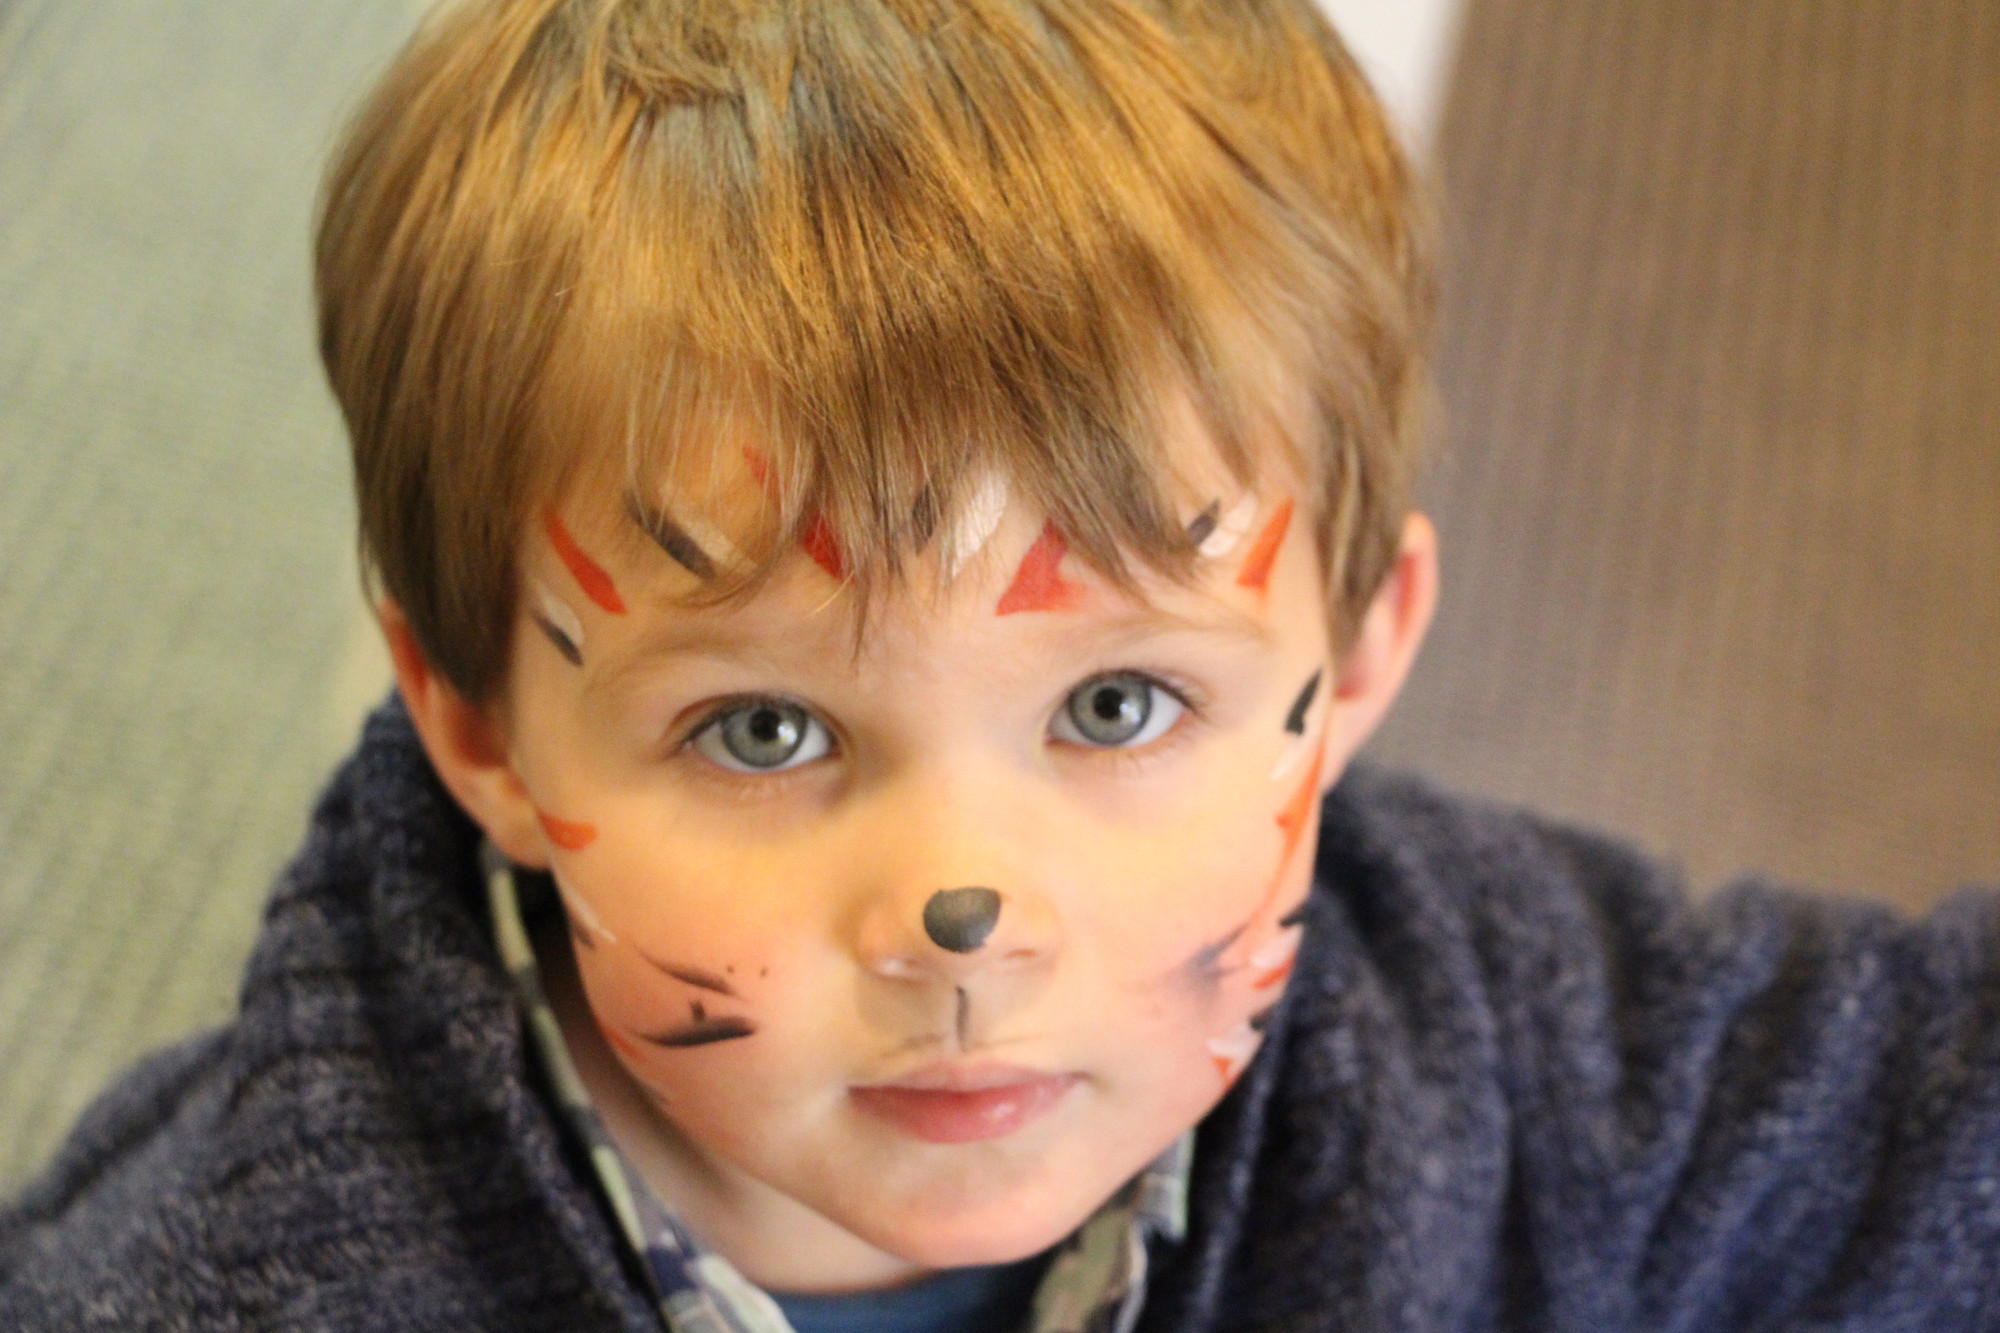 Gavin Drake, 2, had his face painted prior to picking up colorful Easter eggs.